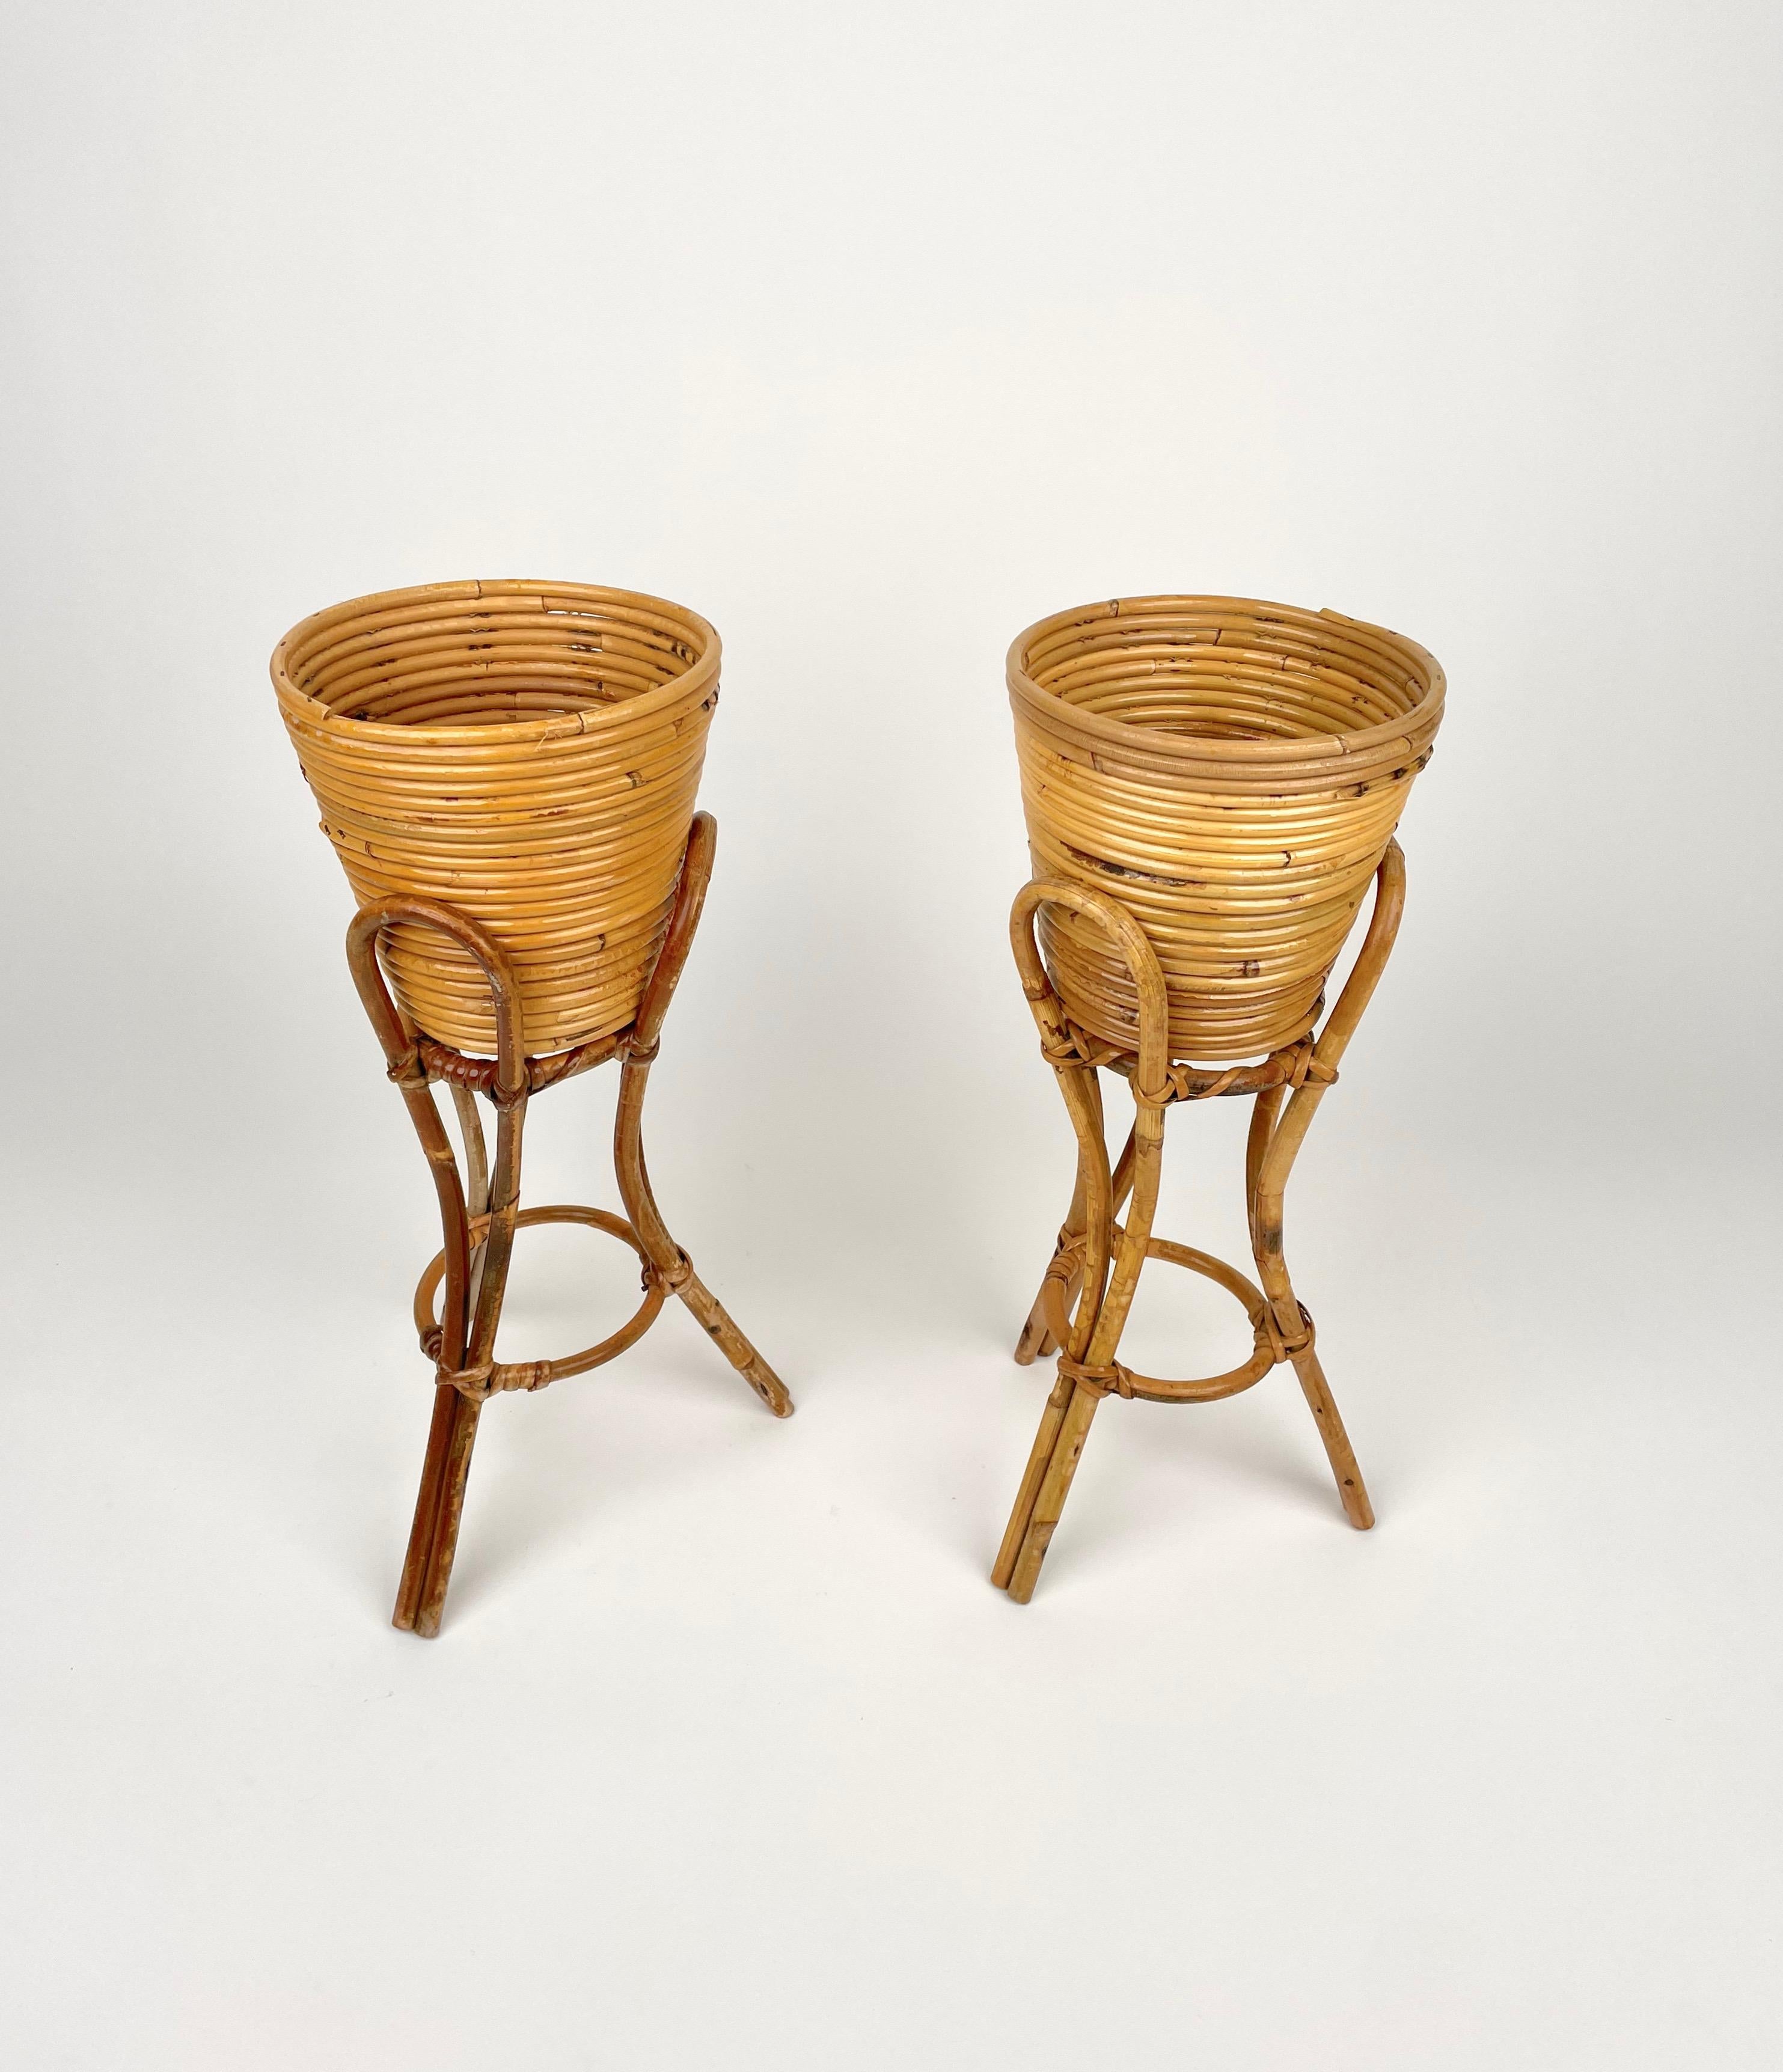 Pair of heightened vase holders planters in rattan and bamboo made in Italy in the 1960s.